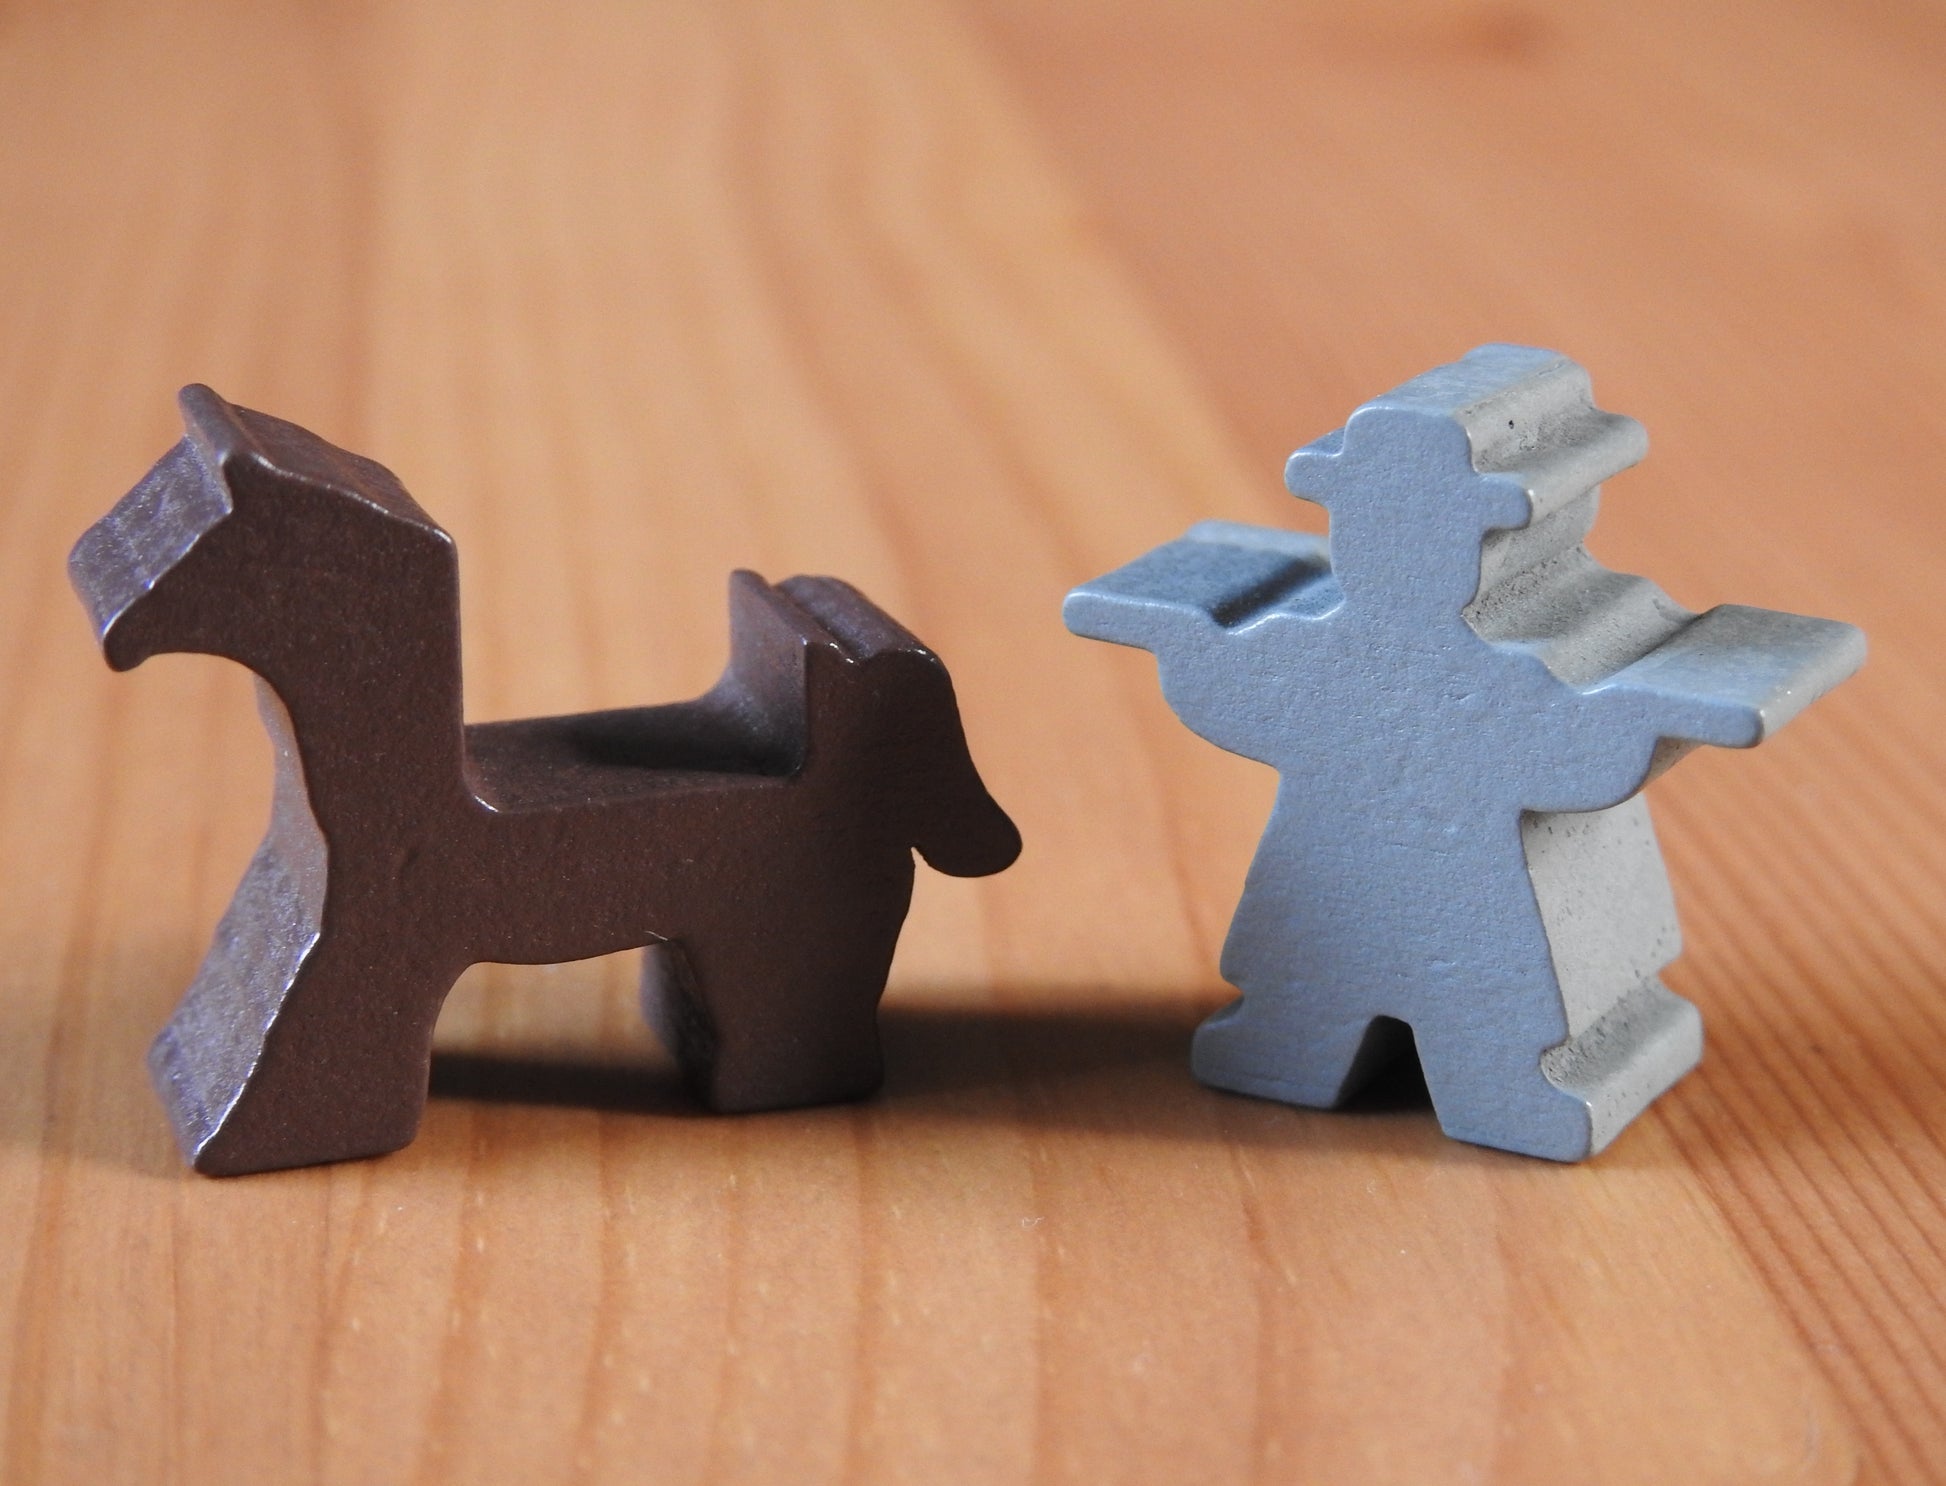 Character Meeples for Colt Express 